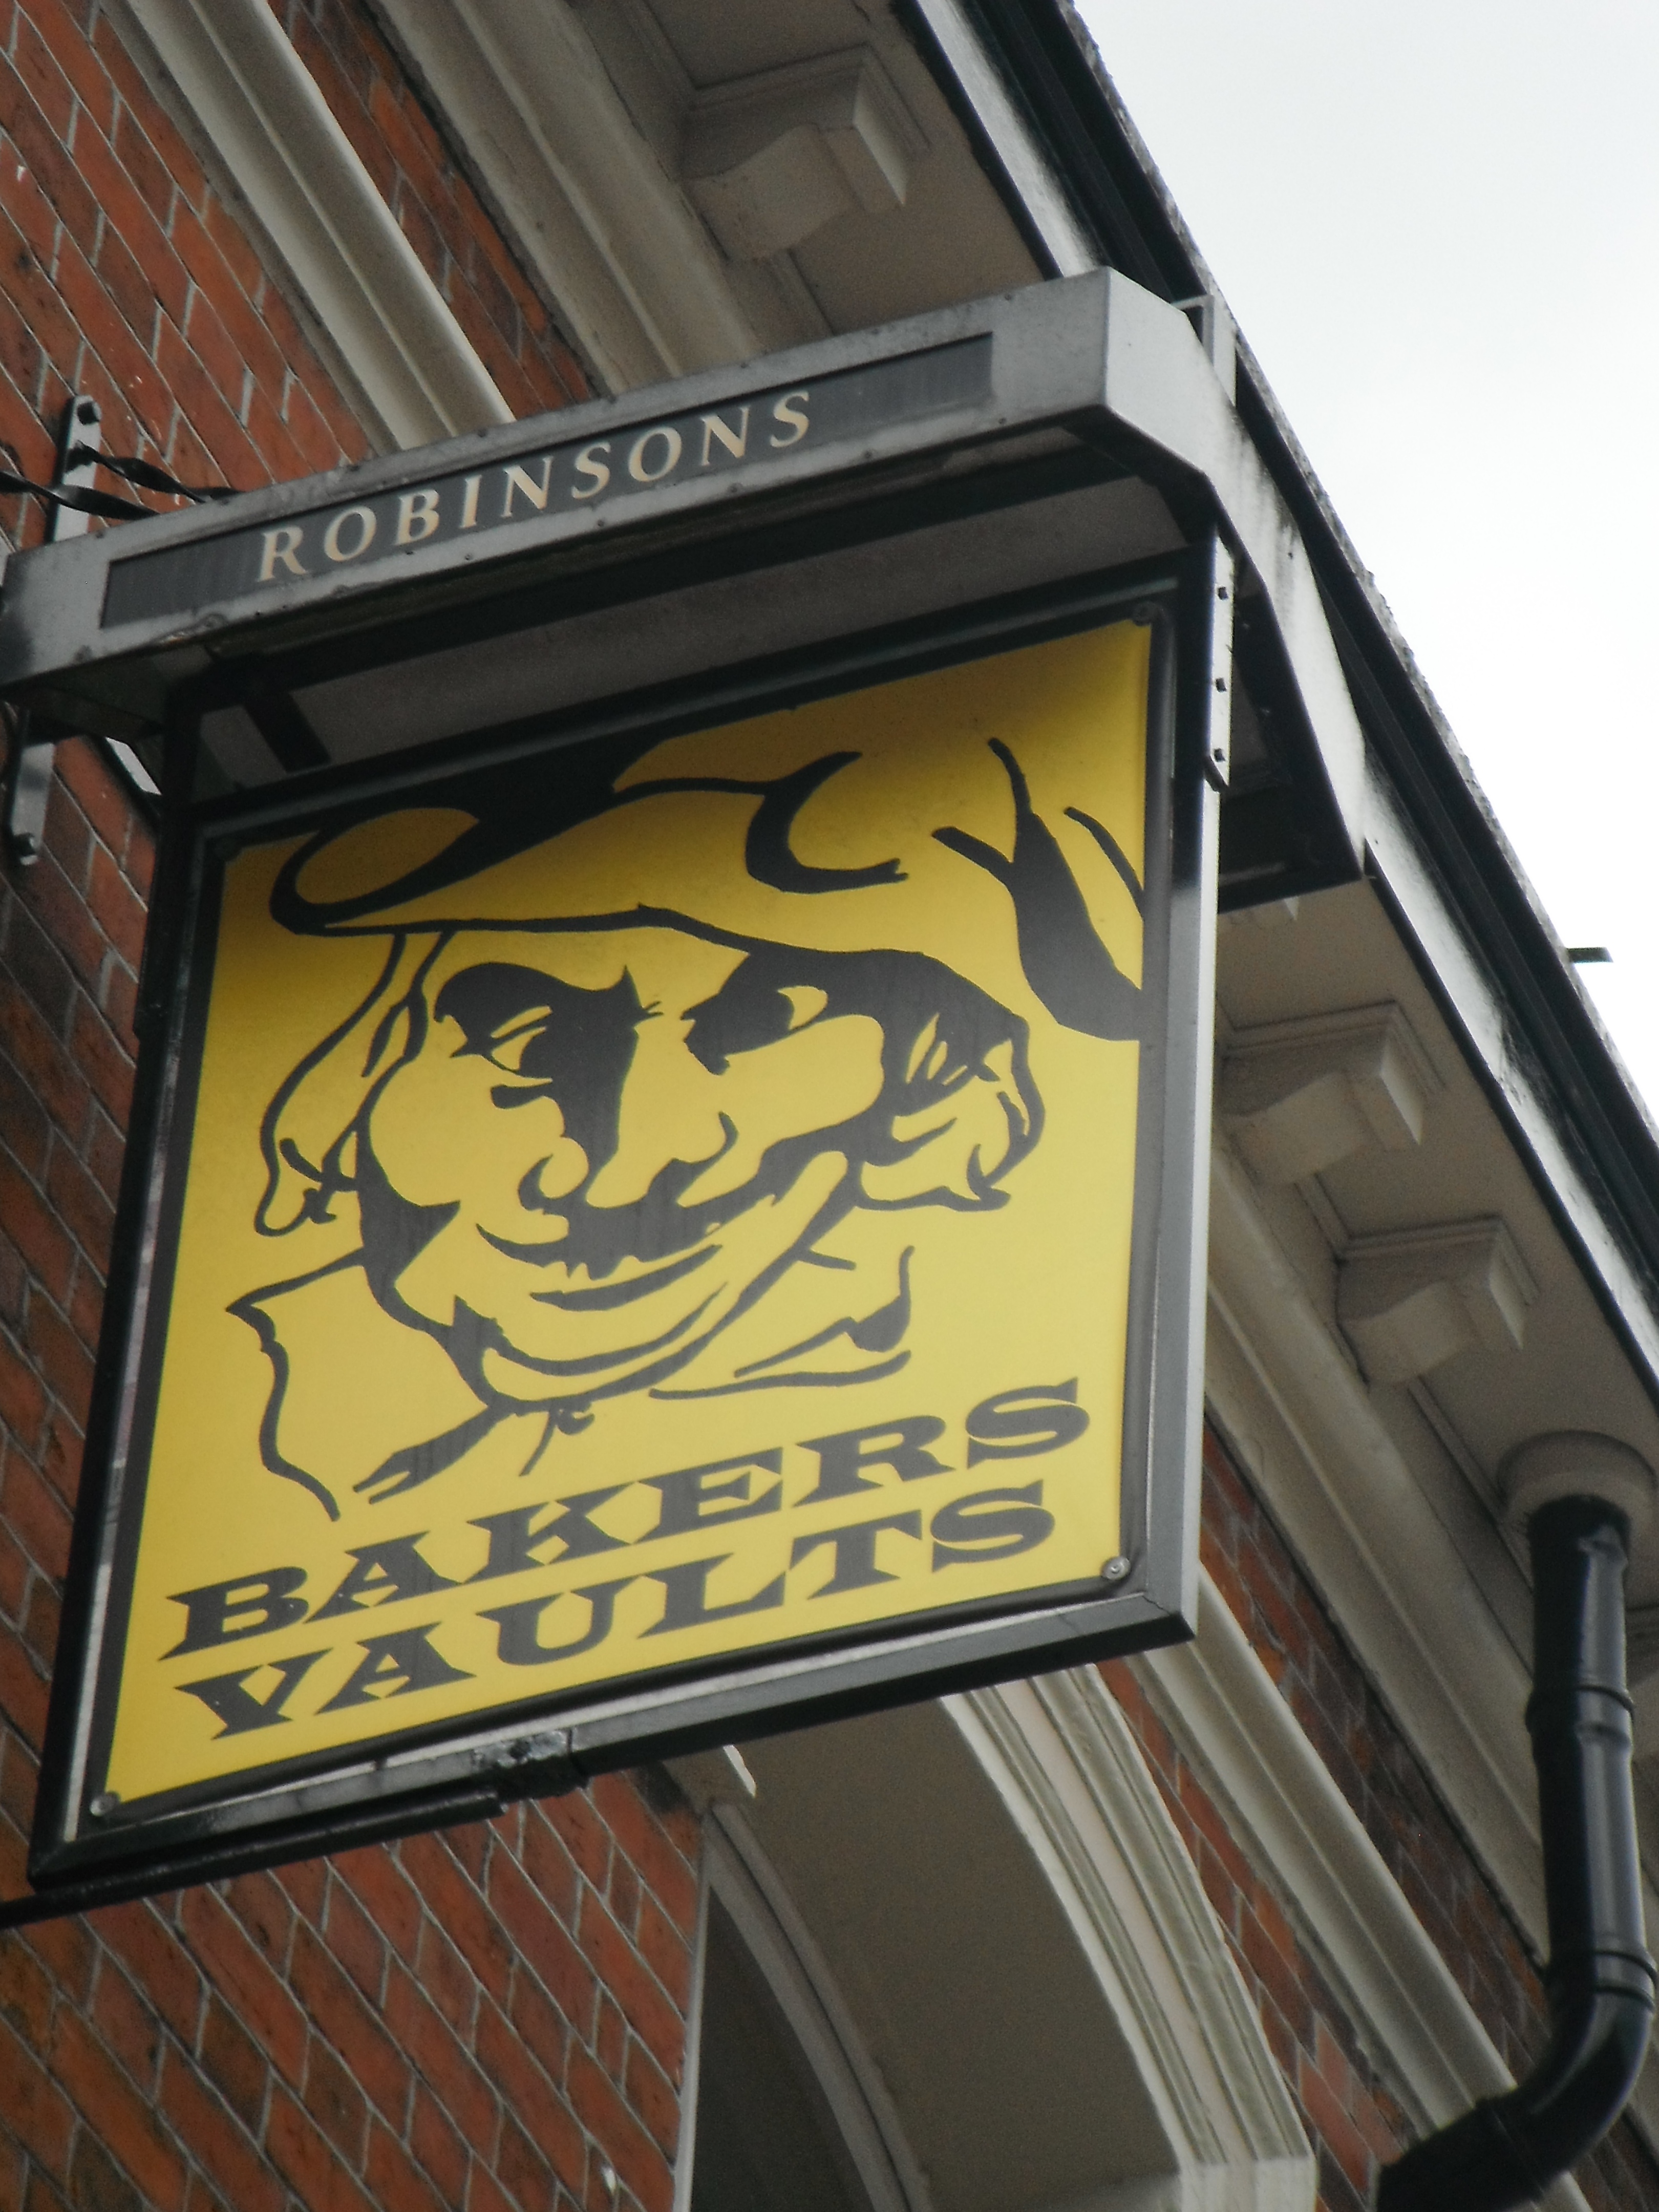 Photo taken by me – The pub sign for The Bakers Vaults Stockport, Cheshire